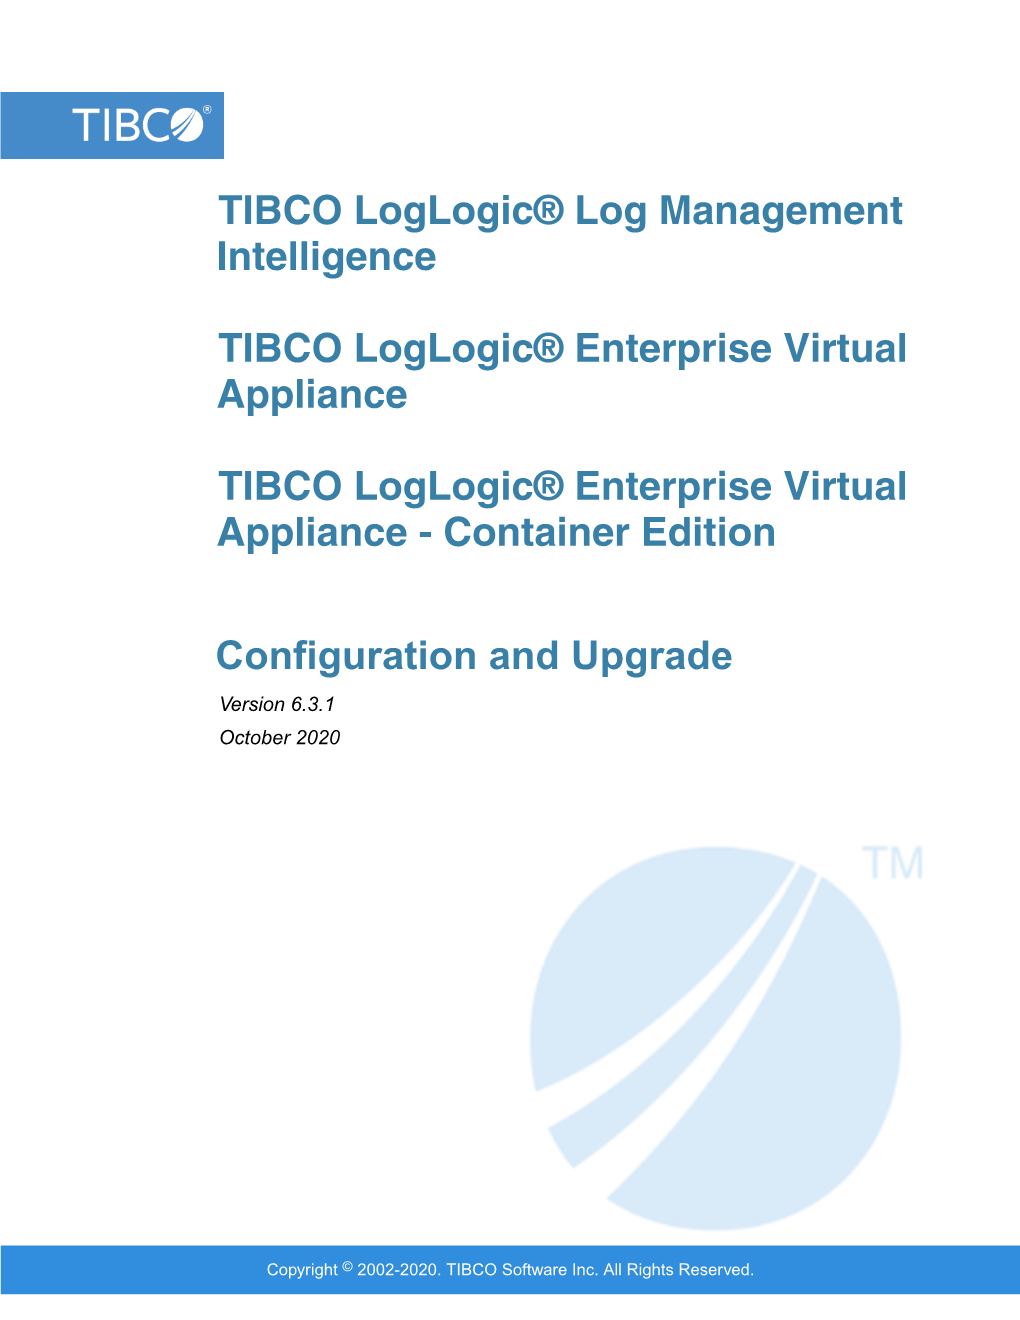 Configuration and Upgrade Version 6.3.1 October 2020